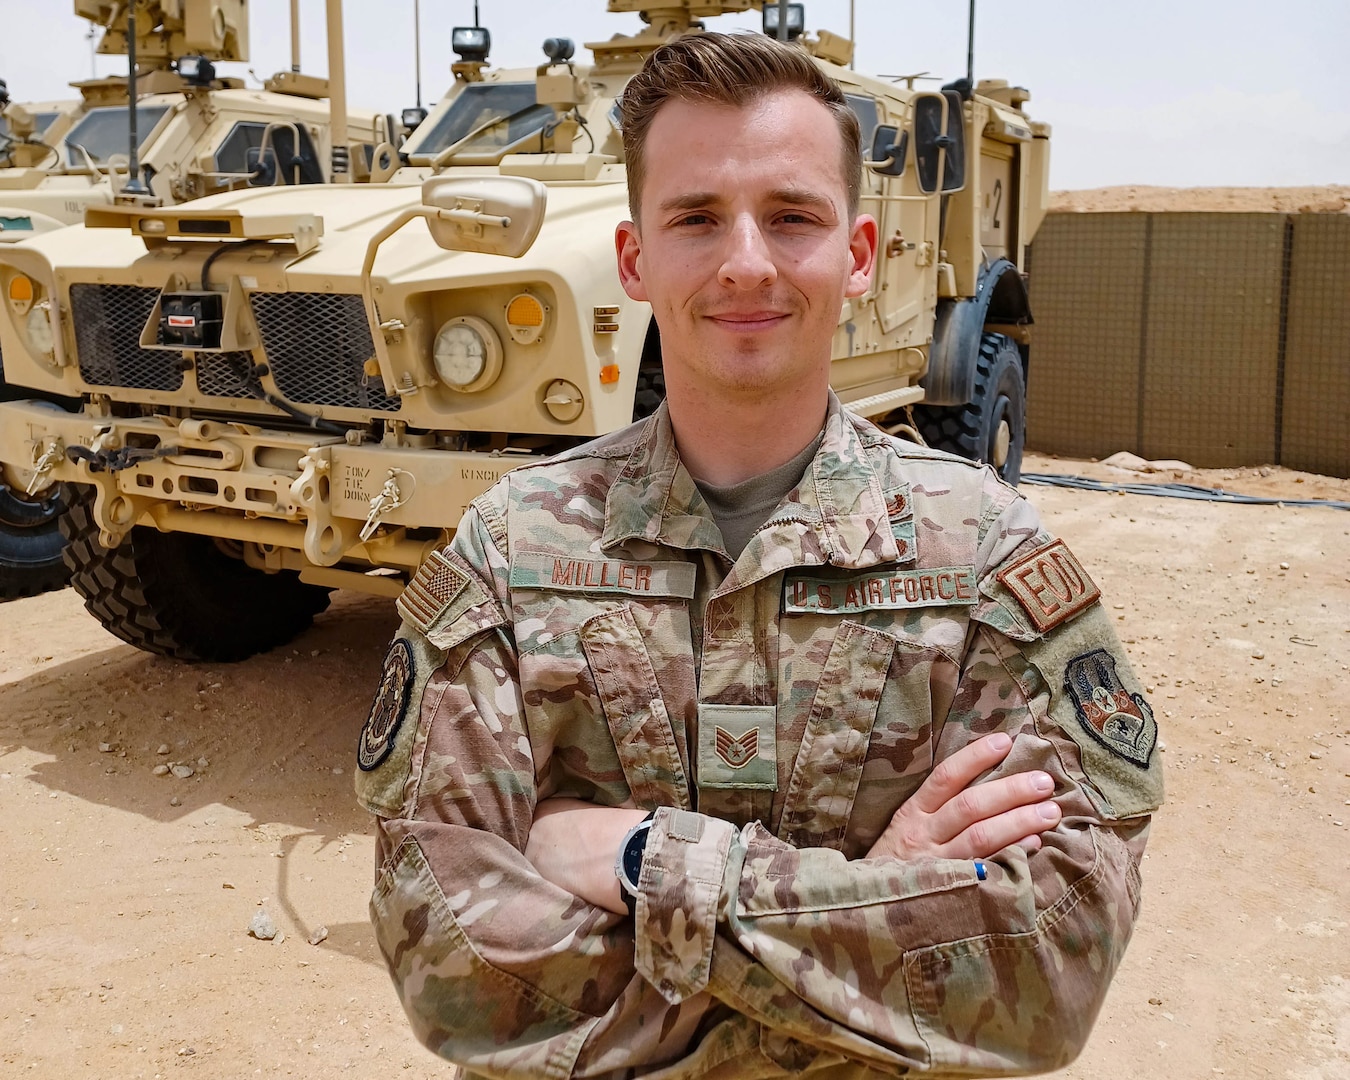 U.S. Air Force Staff Sgt. Vincent Miller, an Explosive Ordnance Disposal craftsman with the 378th Expeditionary Civil Engineer Squadron, poses in front of a Mine Resistant Ambush Protected All-Terrain Vehicle at Prince Sultan Air Base, Kingdom of Saudi Arabia.